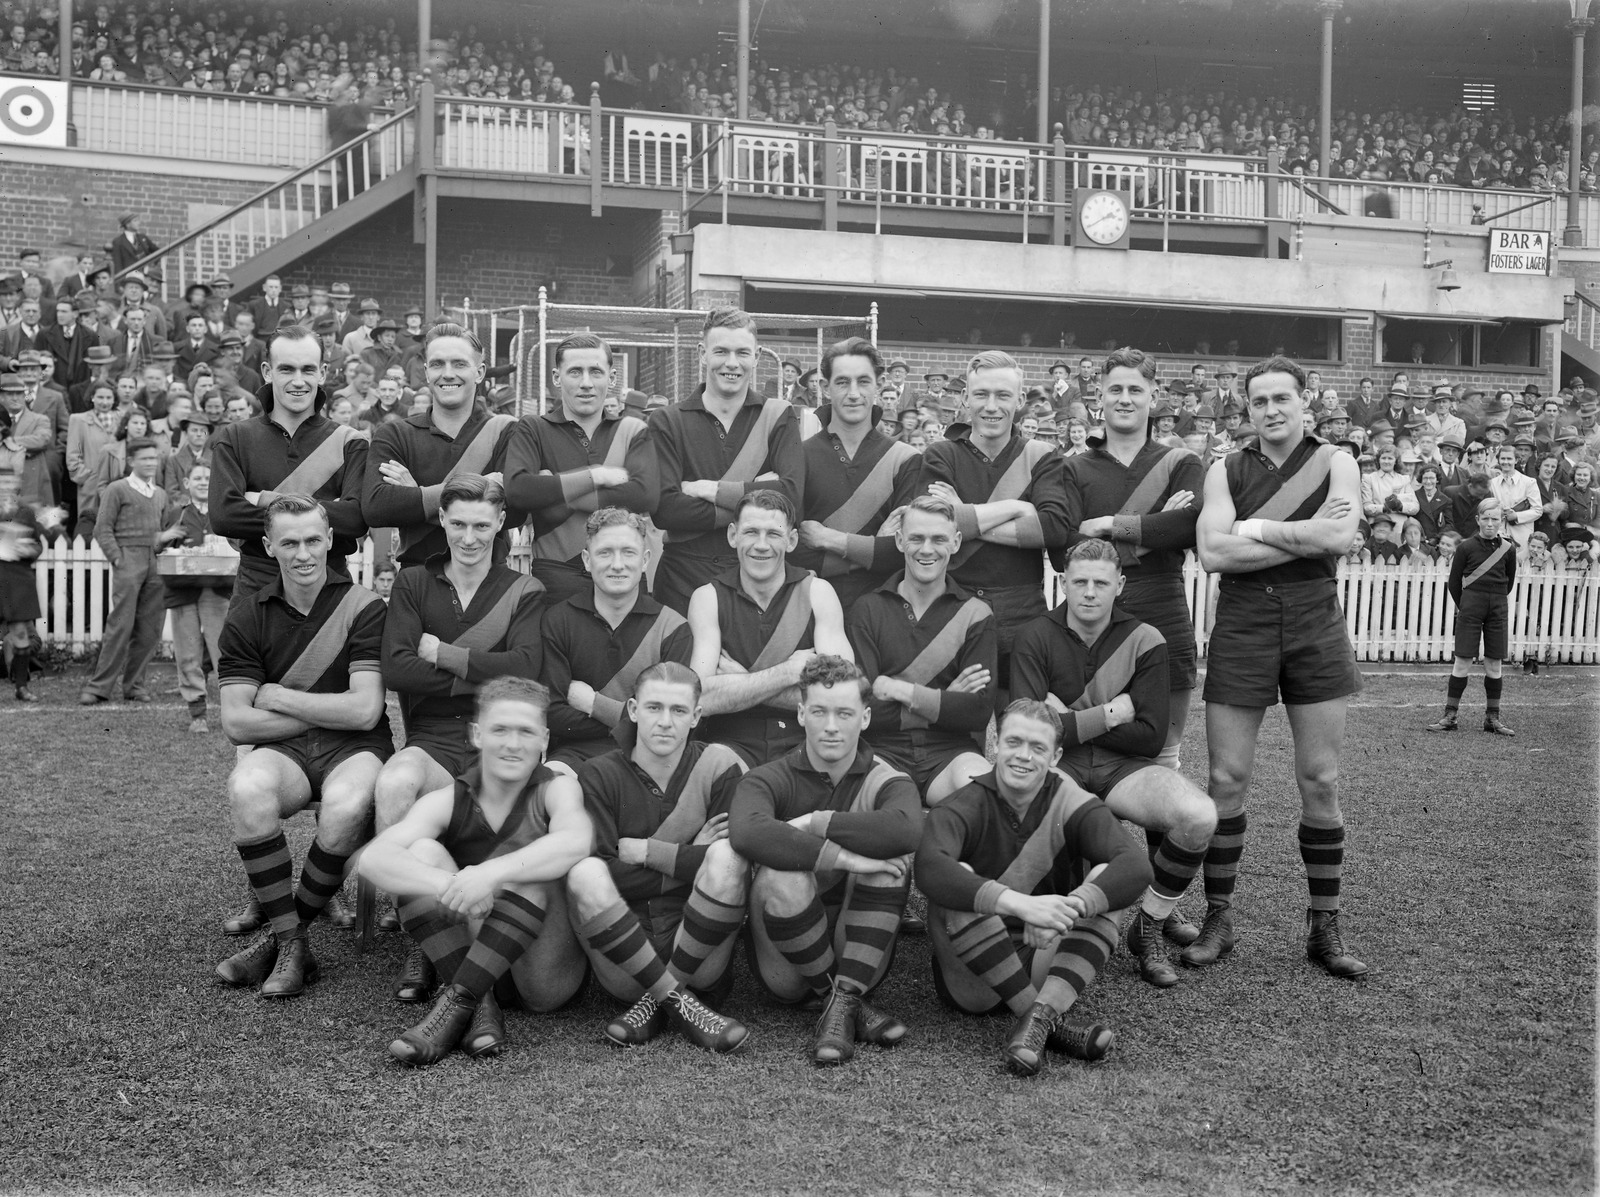 Richmond Football Team (18 players) pose for a photo in from of a grandstand full of fans.